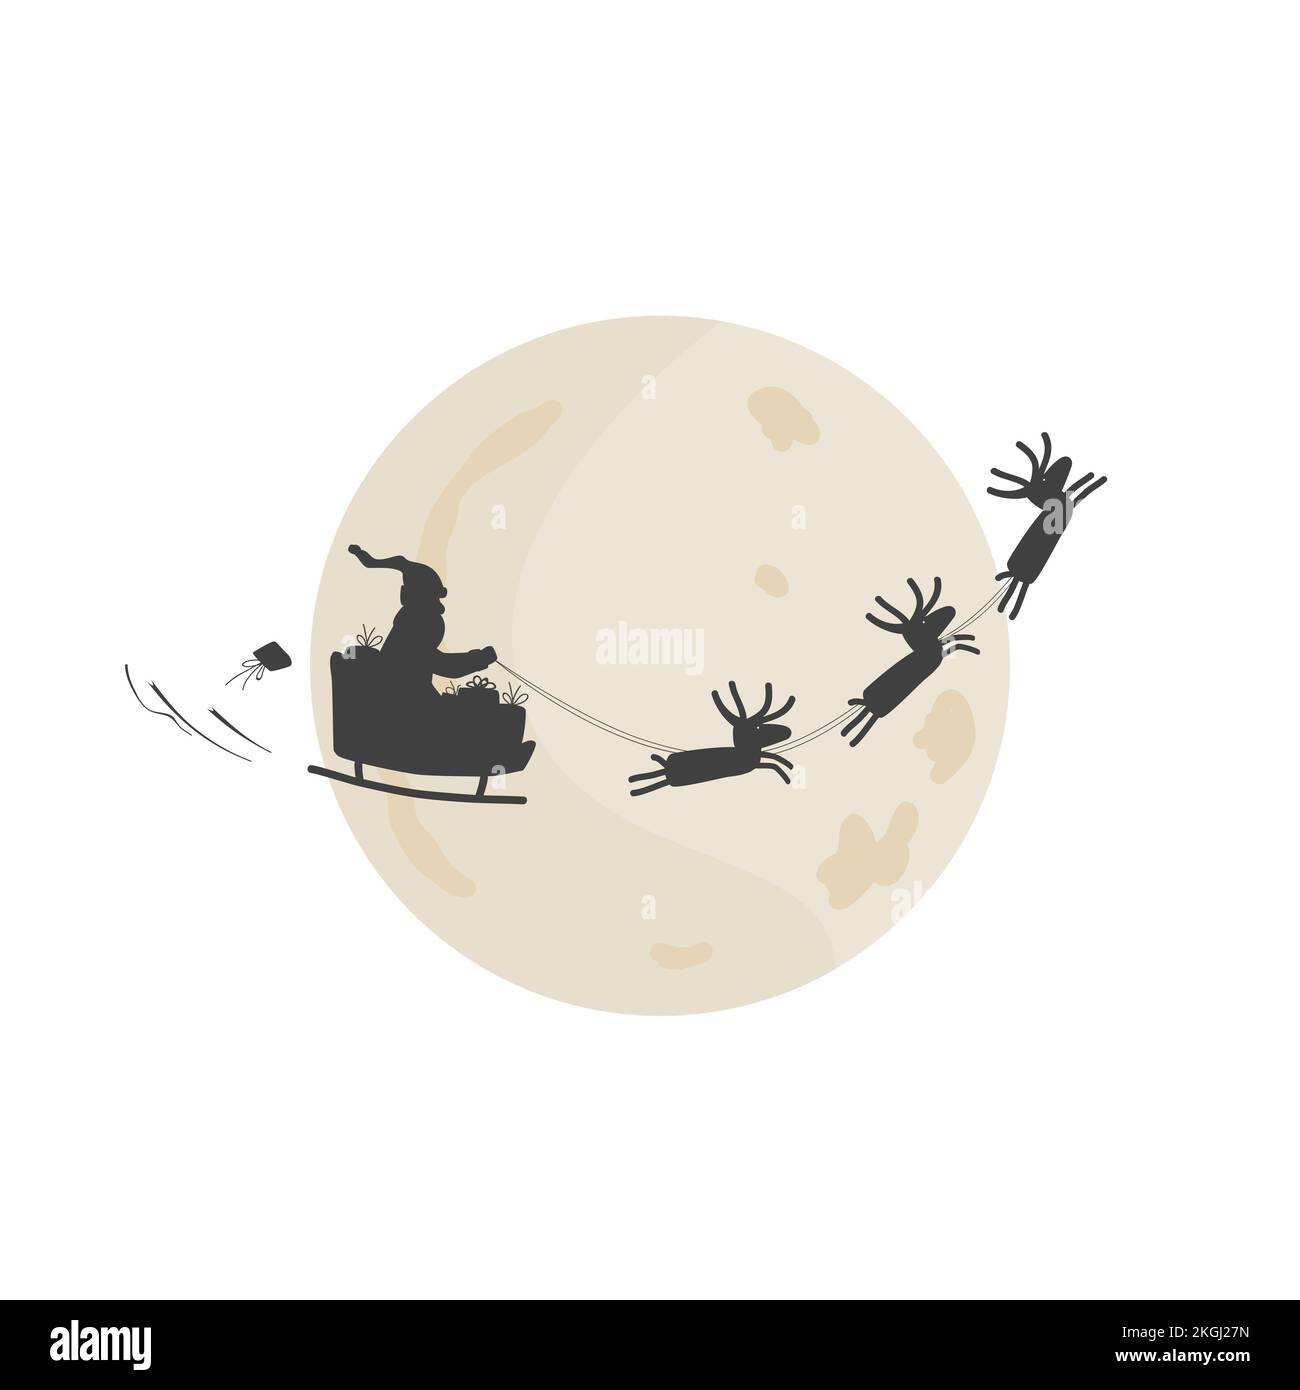 Santa Claus silhouette riding deer in front of moon. Vector illustration Stock Vector